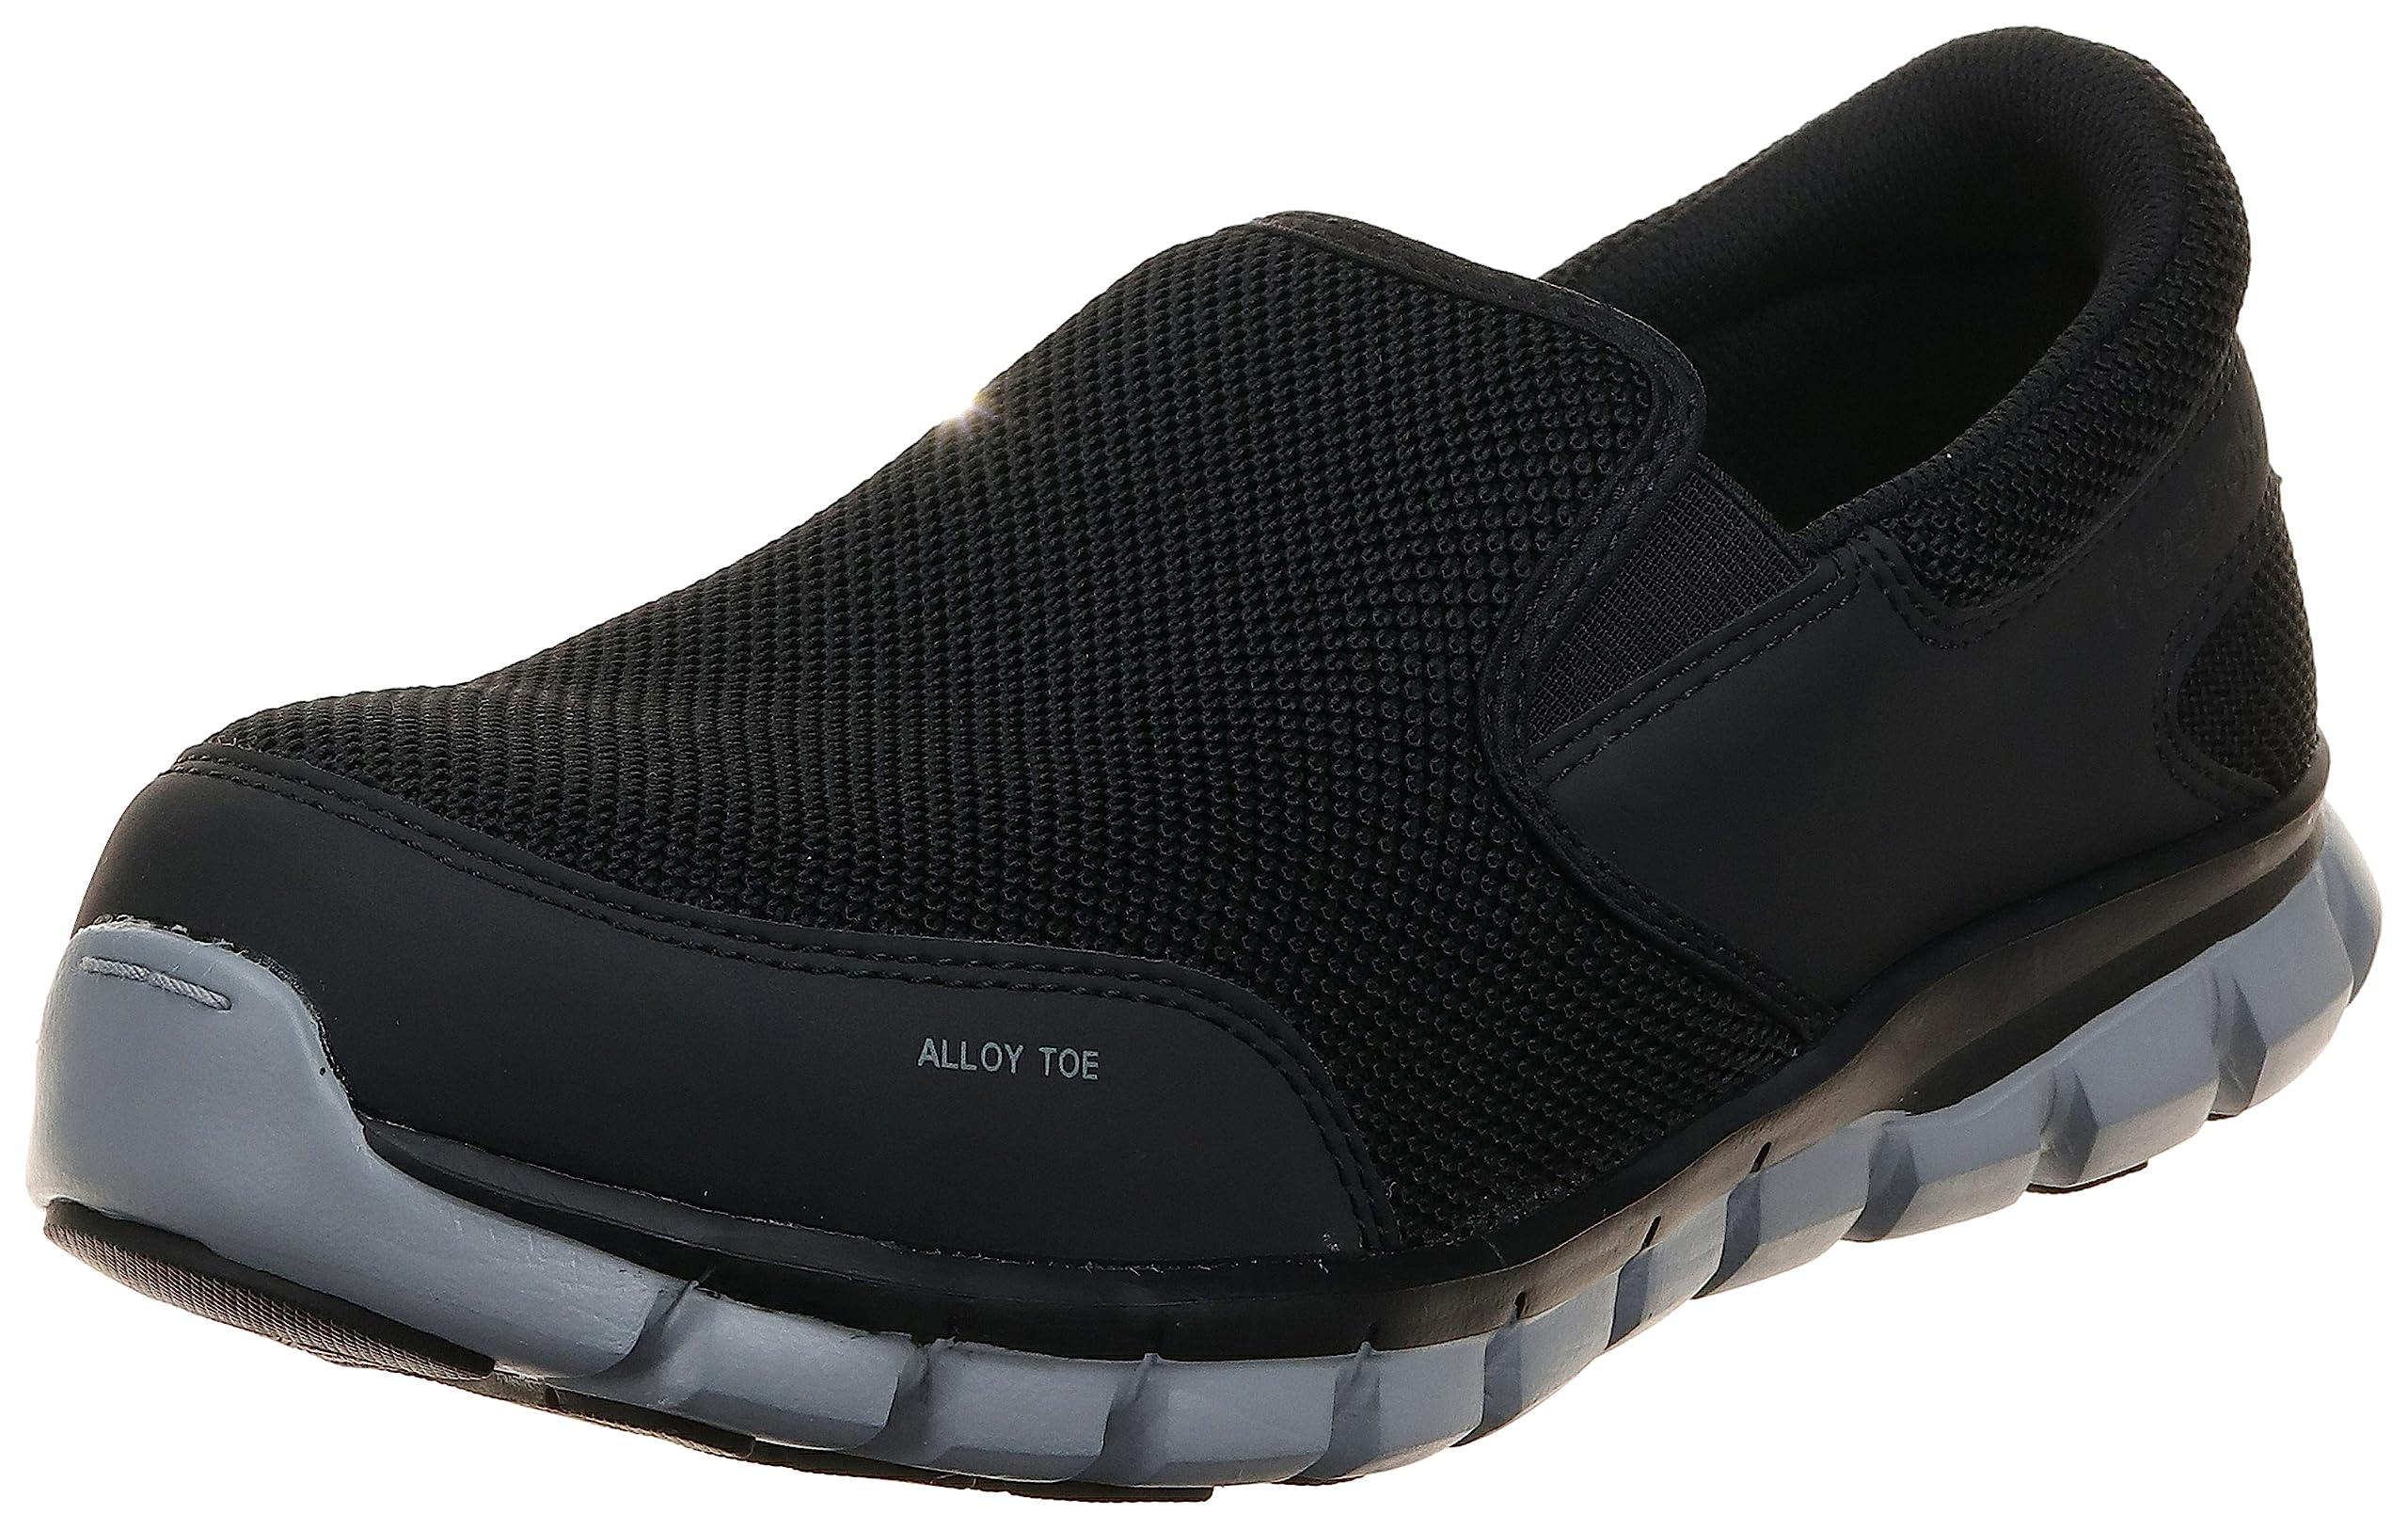 Reebok mens Sublite Cushion Work Safety Toe Athletic Slip-on Industrial Construction Shoe, Black, 10.5 Wide US